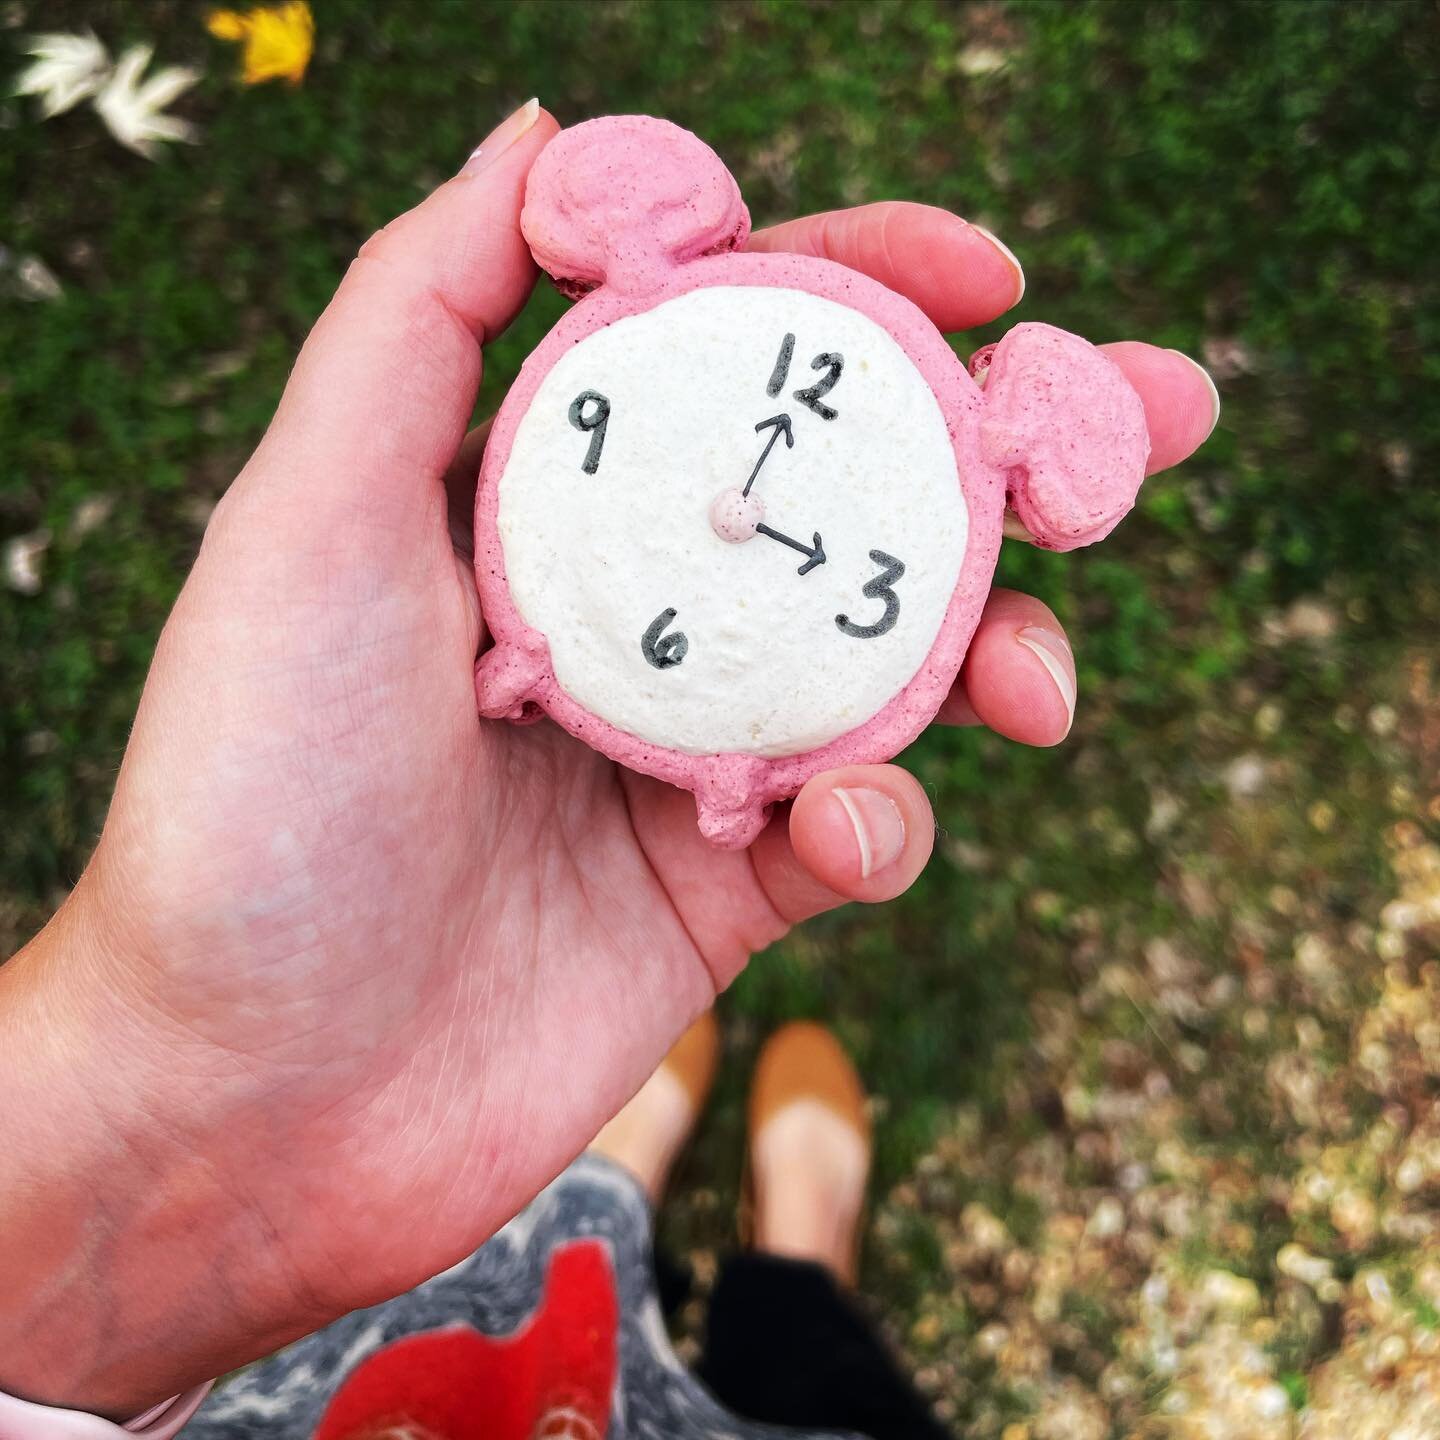 Ending Daylight Savings Time on Sunday should always be followed by a National Holiday on Monday ⏰ #avlmom #avlmoms #whattimeisit #whatdayisit #whereami